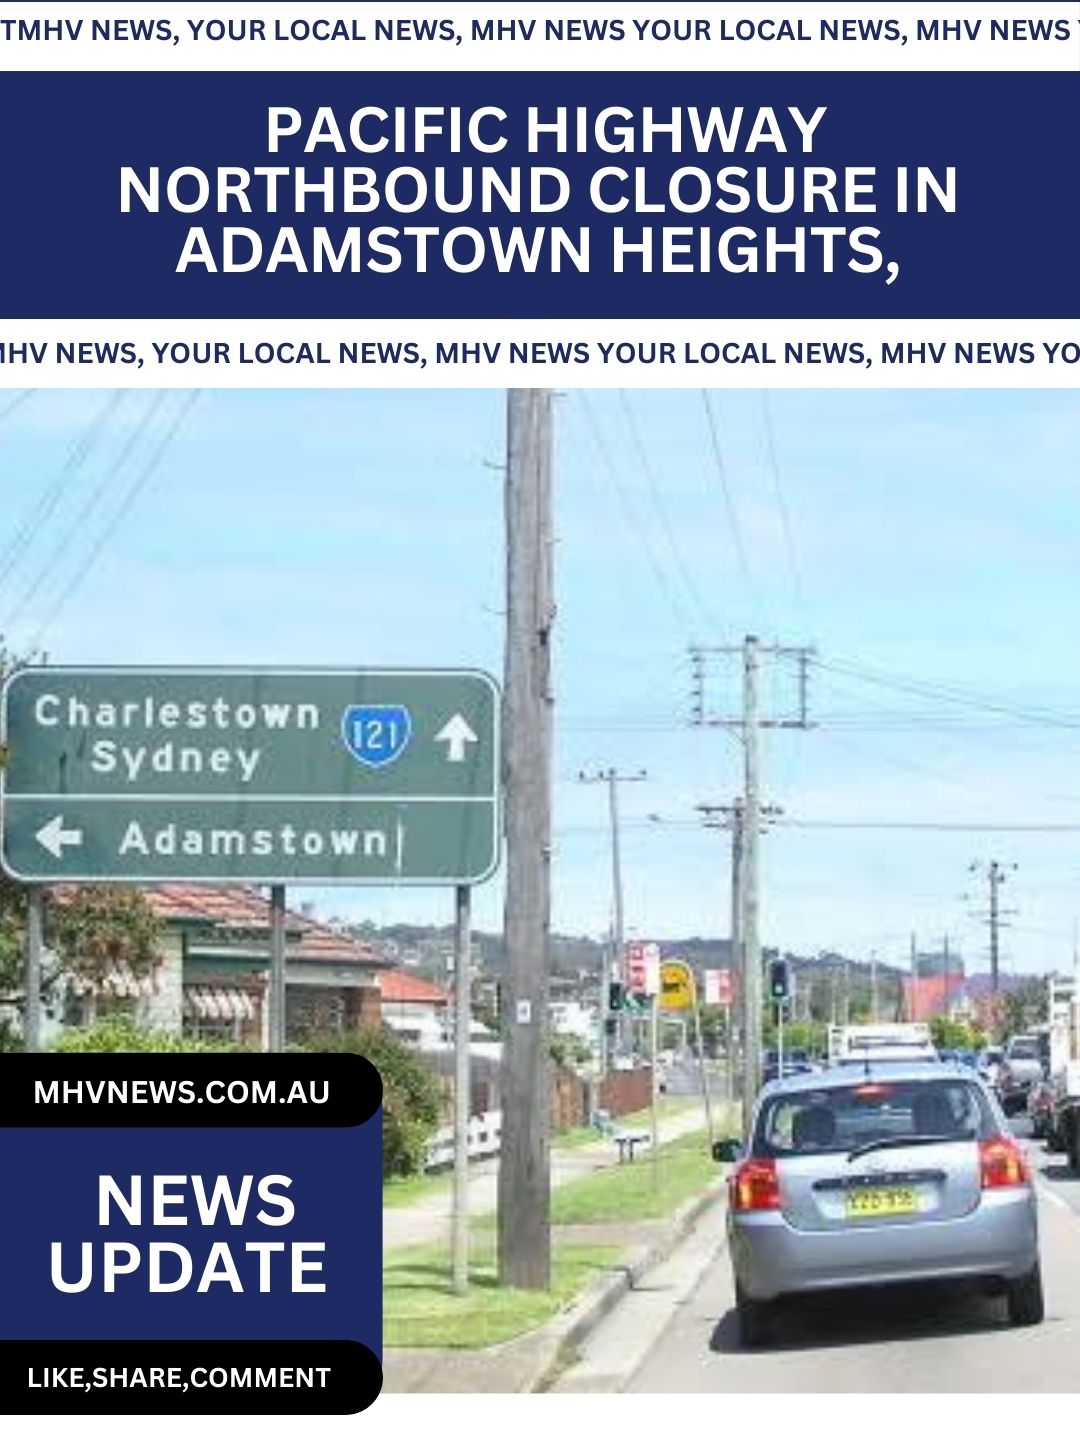 You are currently viewing TRAFFIC ALERT: PACIFIC HIGHWAY NORTHBOUND CLOSURE IN ADAMSTOWN HEIGHTS